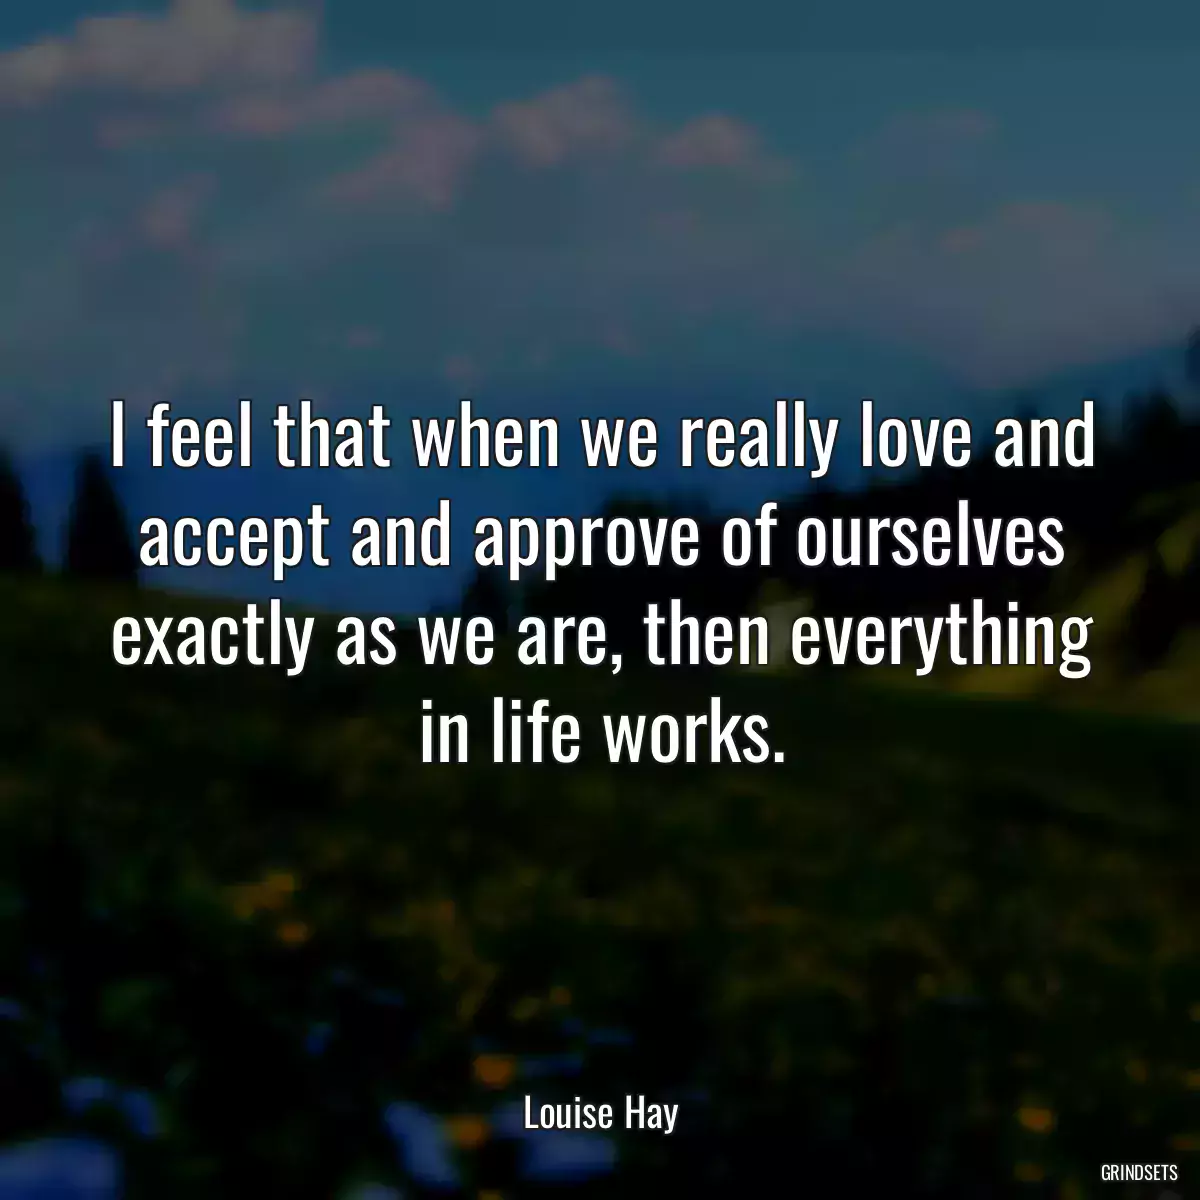 I feel that when we really love and accept and approve of ourselves exactly as we are, then everything in life works.